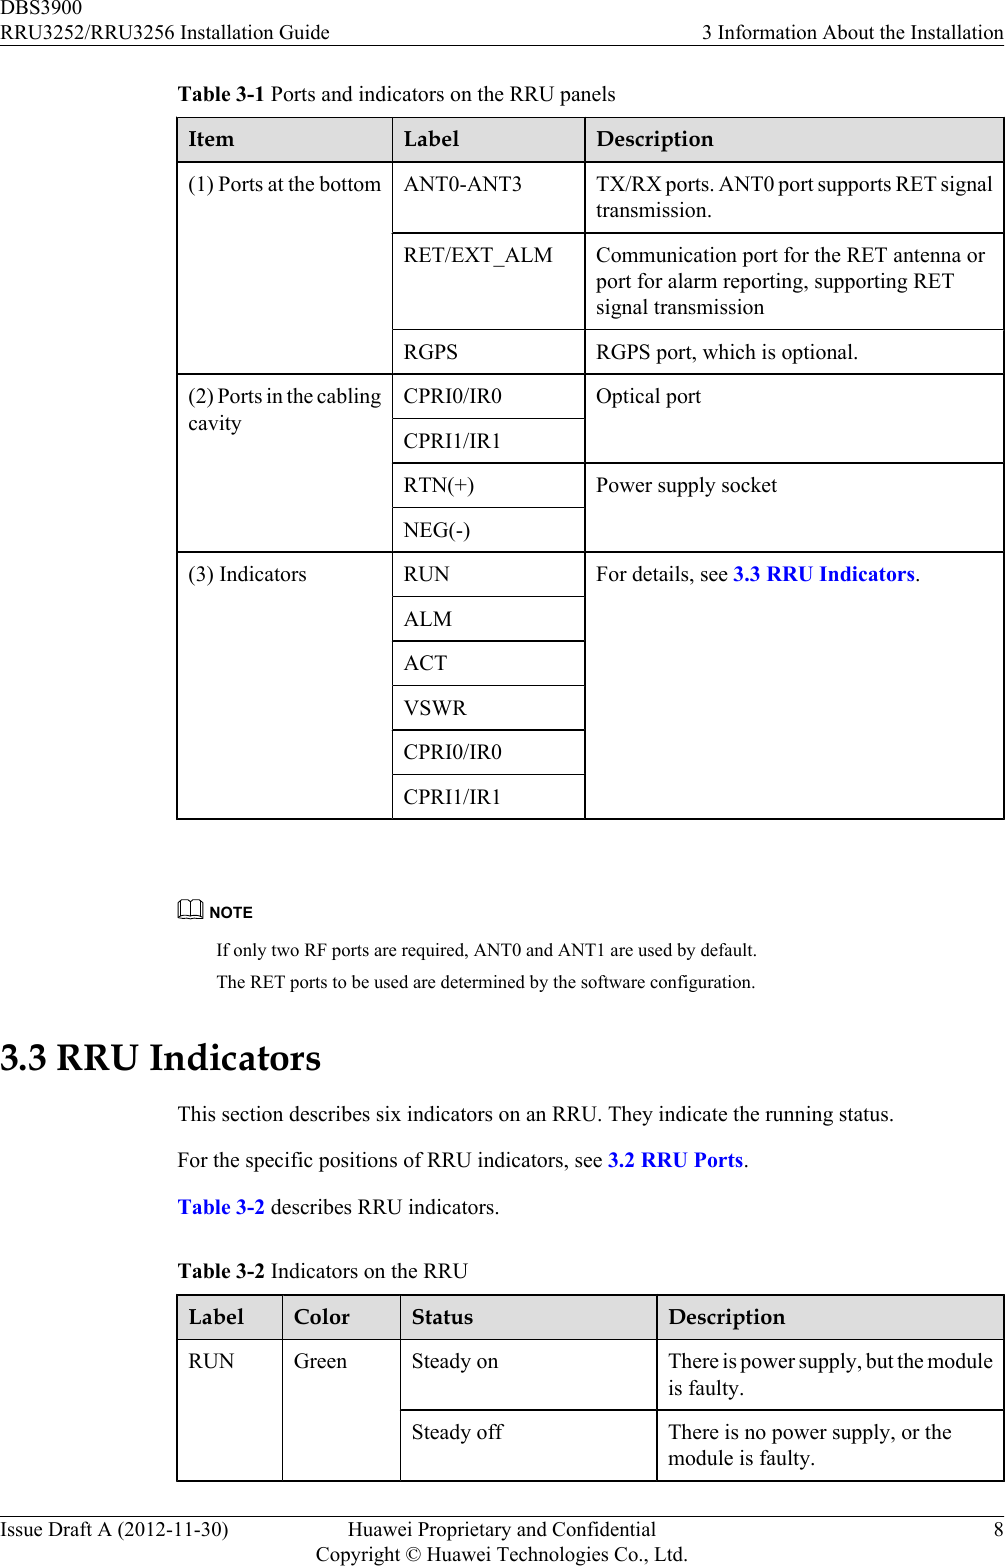 Table 3-1 Ports and indicators on the RRU panelsItem Label Description(1) Ports at the bottom ANT0-ANT3 TX/RX ports. ANT0 port supports RET signaltransmission.RET/EXT_ALM Communication port for the RET antenna orport for alarm reporting, supporting RETsignal transmissionRGPS RGPS port, which is optional.(2) Ports in the cablingcavityCPRI0/IR0 Optical portCPRI1/IR1RTN(+) Power supply socketNEG(-)(3) Indicators RUN For details, see 3.3 RRU Indicators.ALMACTVSWRCPRI0/IR0CPRI1/IR1 NOTEIf only two RF ports are required, ANT0 and ANT1 are used by default.The RET ports to be used are determined by the software configuration.3.3 RRU IndicatorsThis section describes six indicators on an RRU. They indicate the running status.For the specific positions of RRU indicators, see 3.2 RRU Ports.Table 3-2 describes RRU indicators.Table 3-2 Indicators on the RRULabel Color Status DescriptionRUN Green Steady on There is power supply, but the moduleis faulty.Steady off There is no power supply, or themodule is faulty.DBS3900RRU3252/RRU3256 Installation Guide 3 Information About the InstallationIssue Draft A (2012-11-30) Huawei Proprietary and ConfidentialCopyright © Huawei Technologies Co., Ltd.8